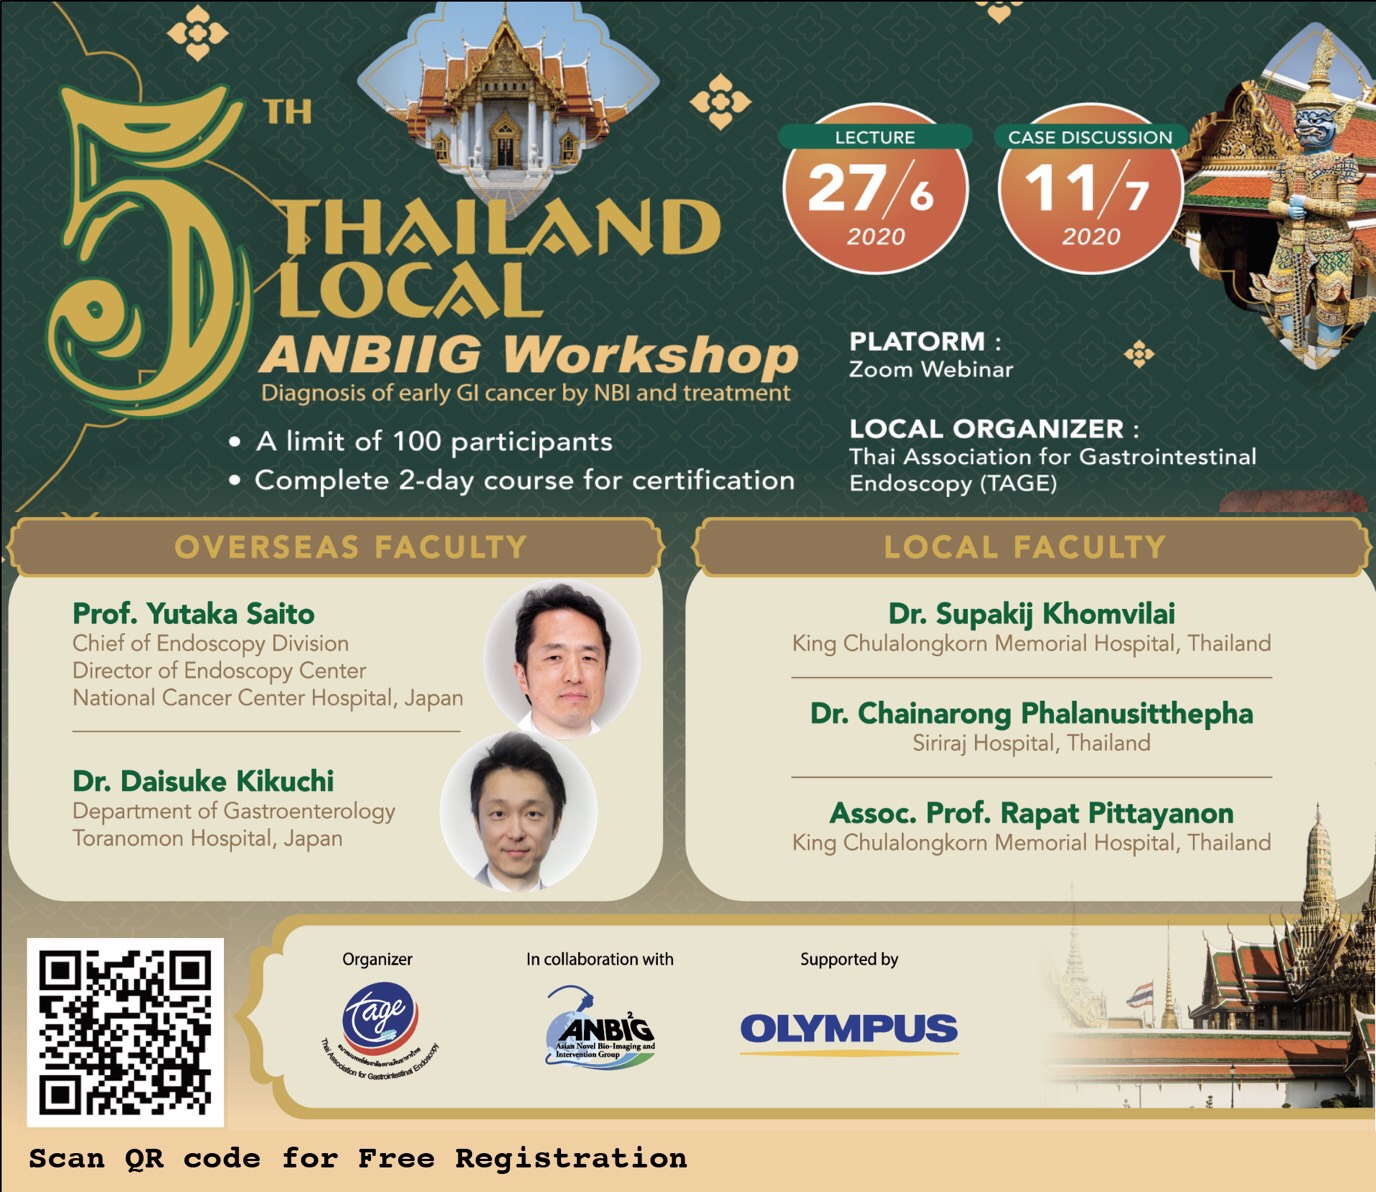 5TH THAILAND LOCAL ANBIIG Workshop Diagnosis of early GI cancer by NBI and treatment